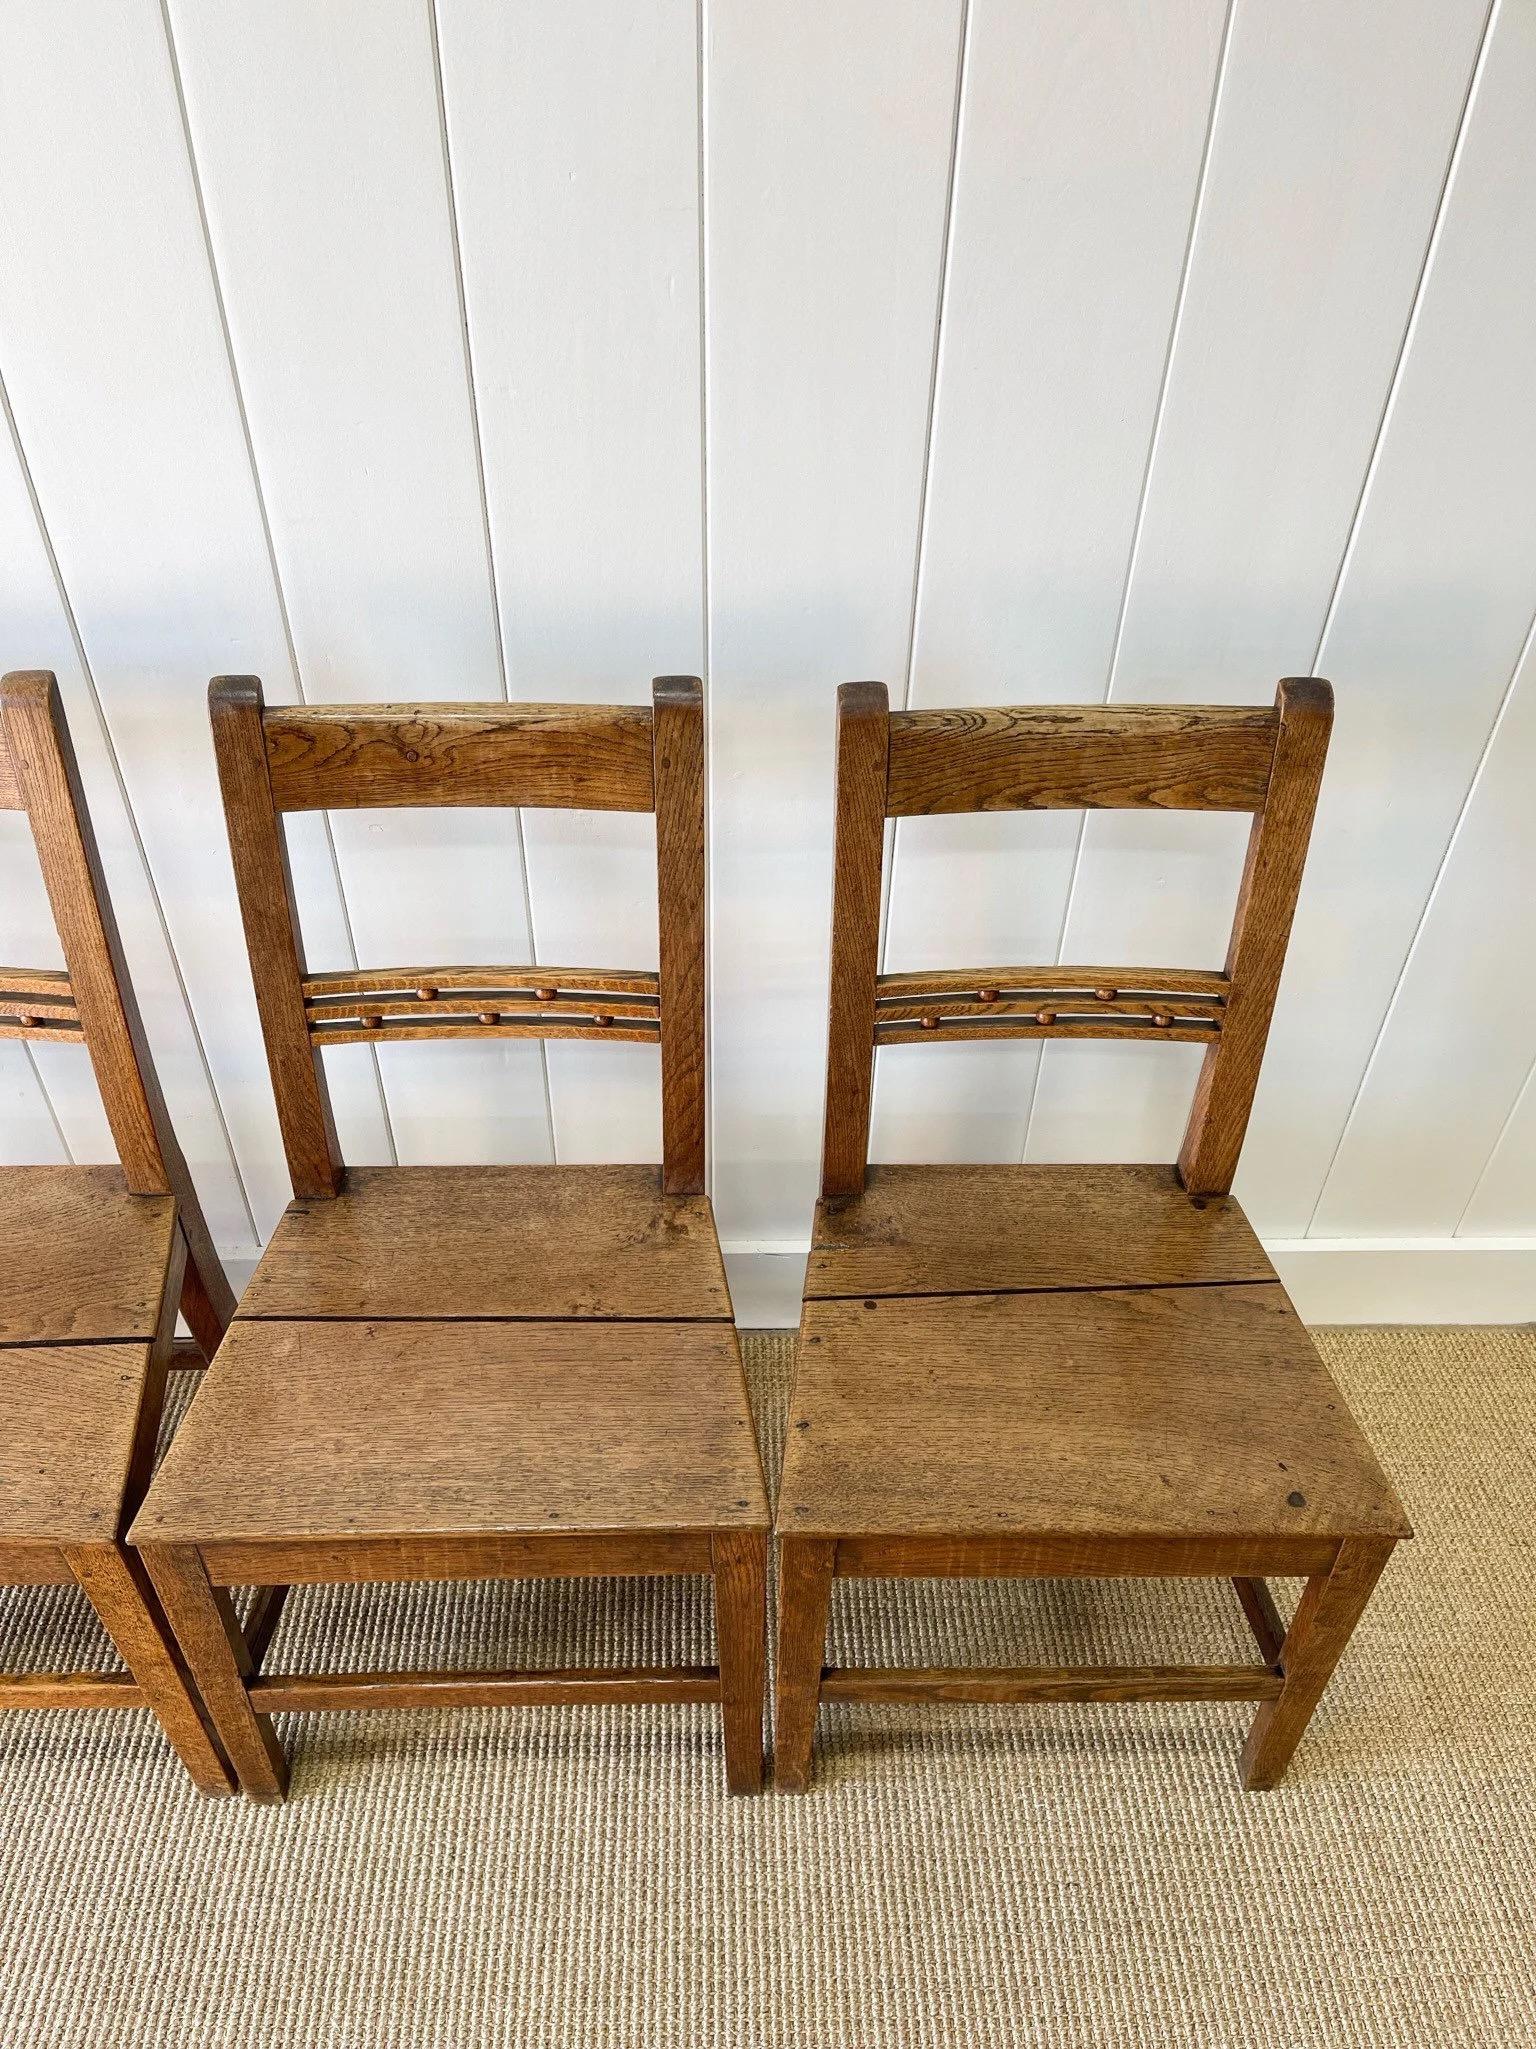 A Set of 4 English Oak and Elm Georgian Chairs c1800 In Good Condition For Sale In Oak Park, MI